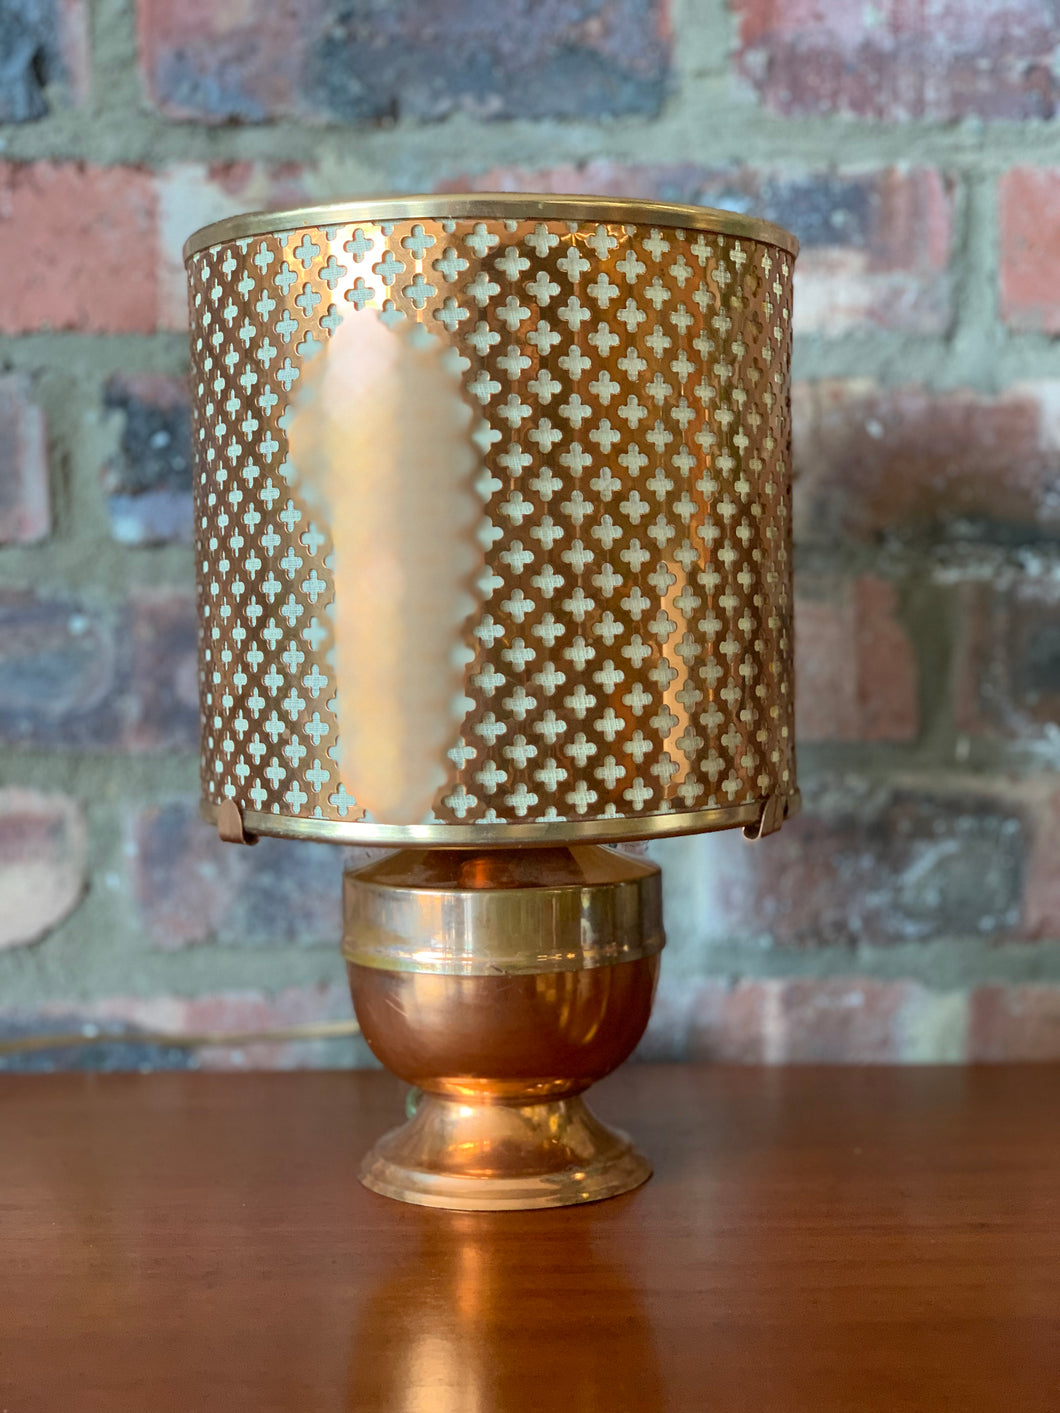 Copper Table Lamp